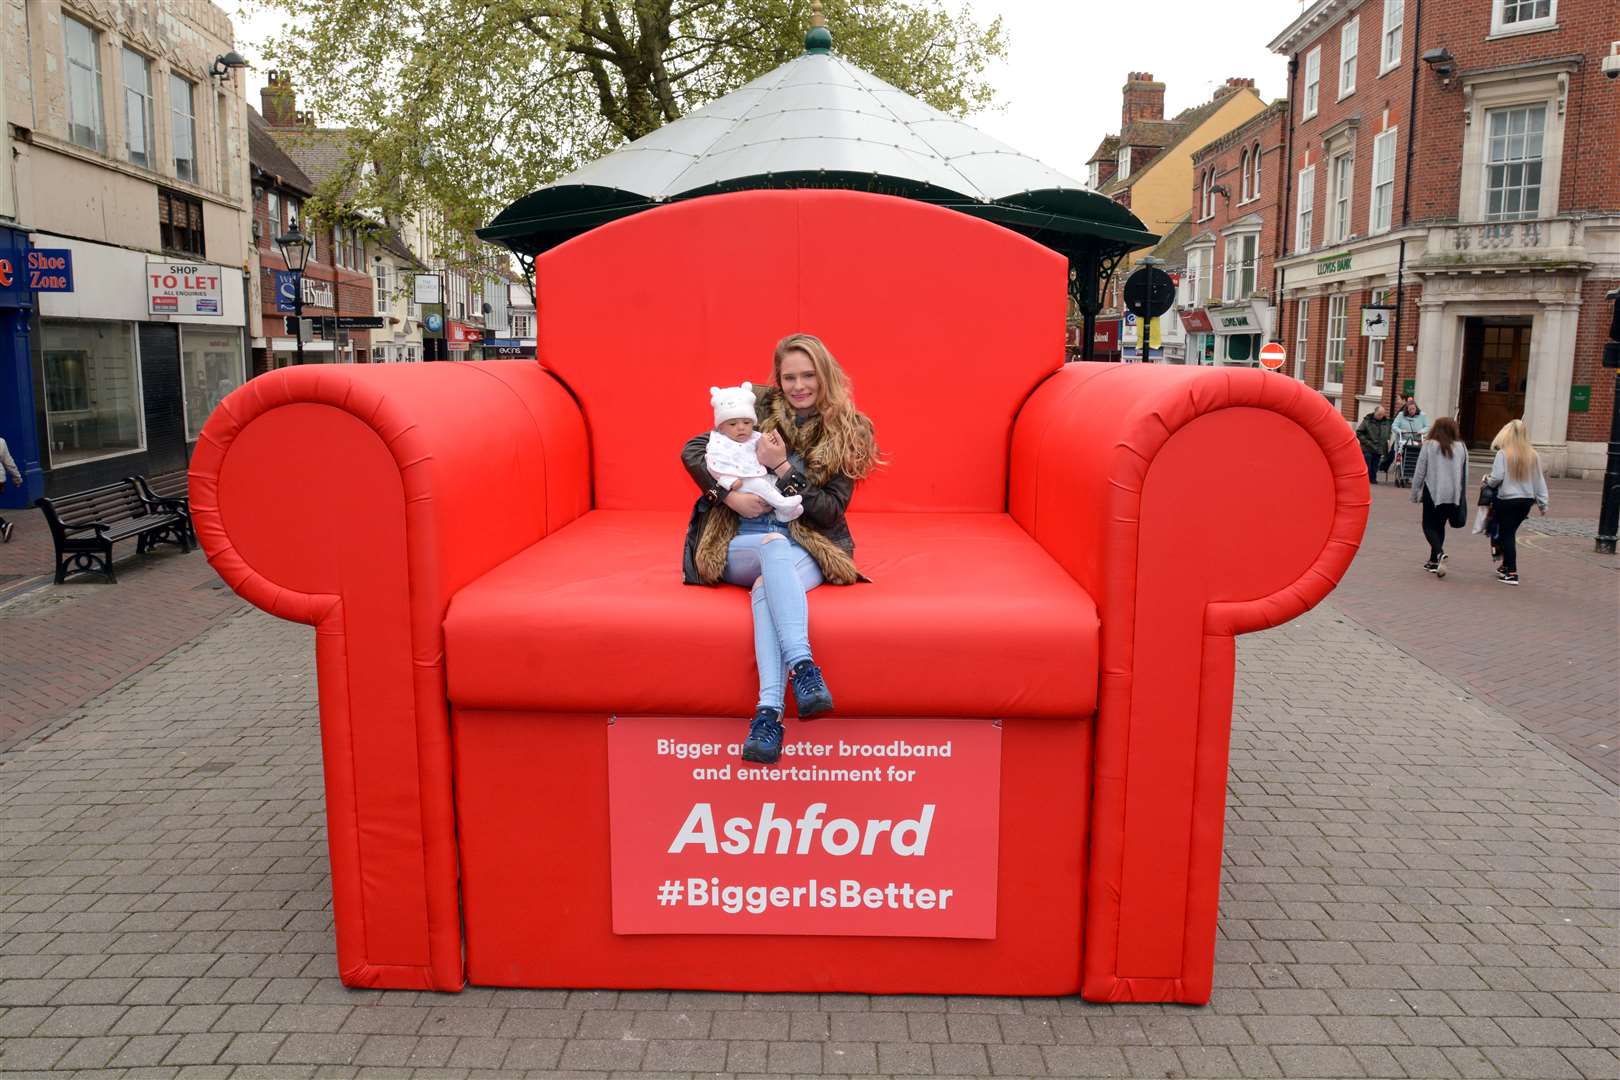 Virgin brought a giant red armchair to Ashford High Street to mark its work to connect 8,000 homes in the district with fibre optic broadband